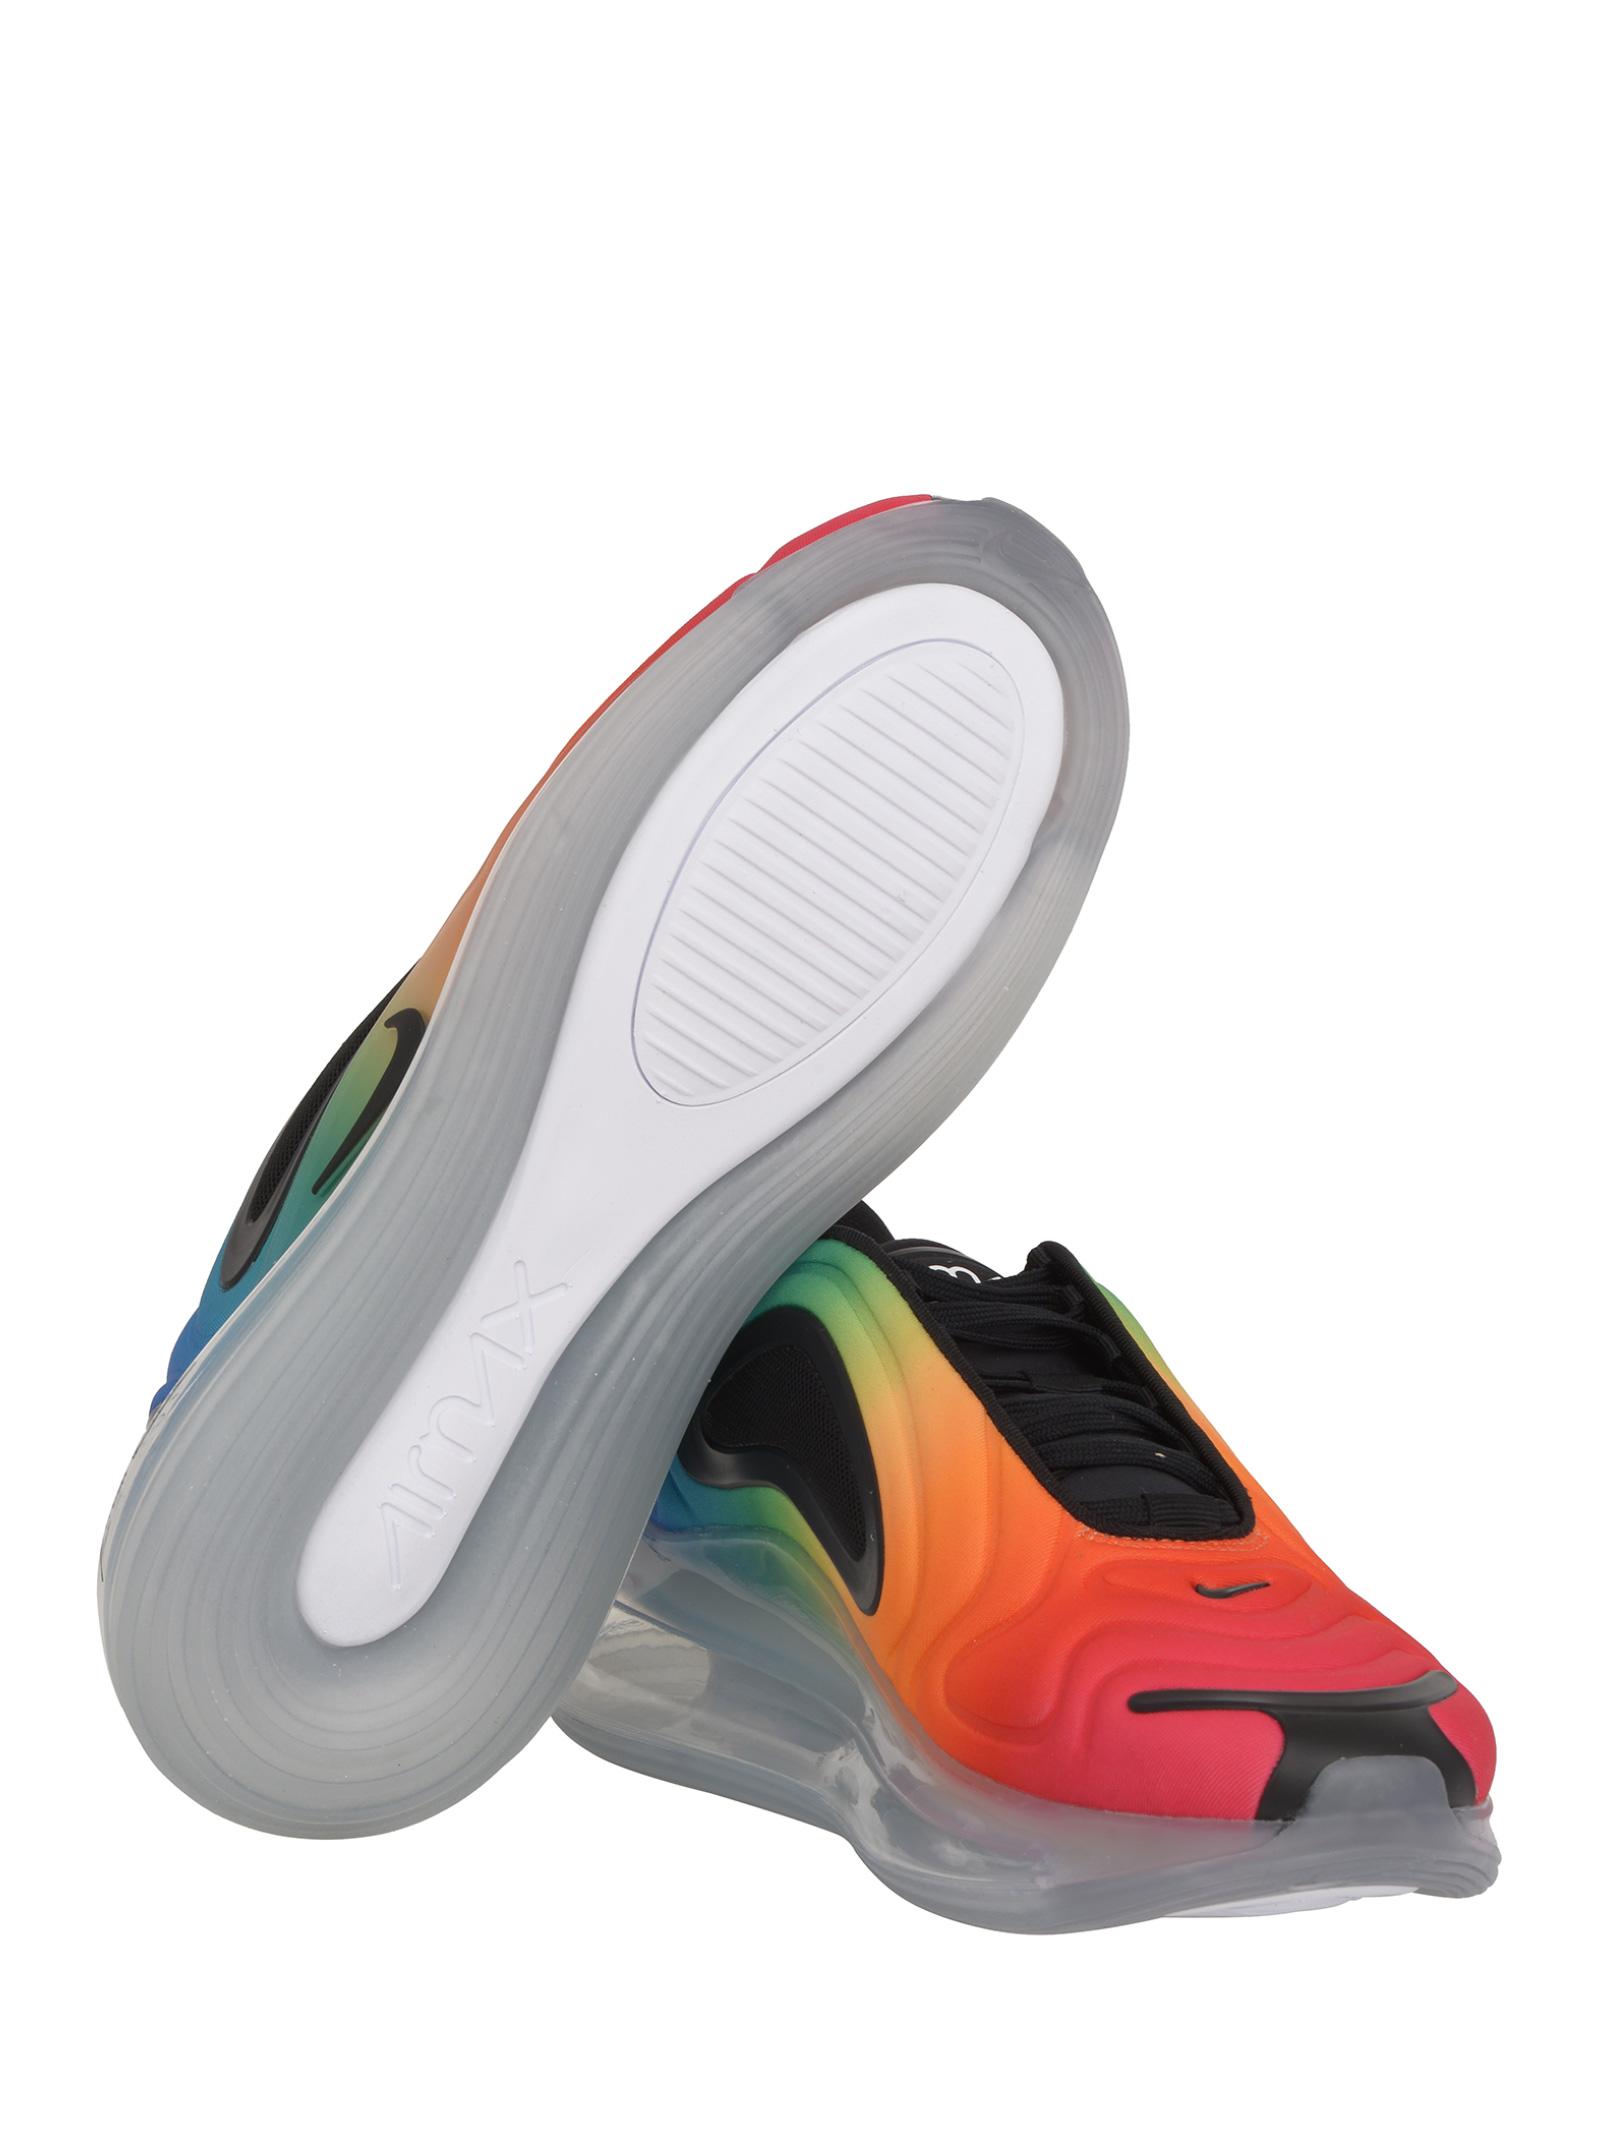 Nike Synthetic Air Max 720 Betrue Sneakers In Rainbow Colors With Visible  Air Unit. for Men | Lyst